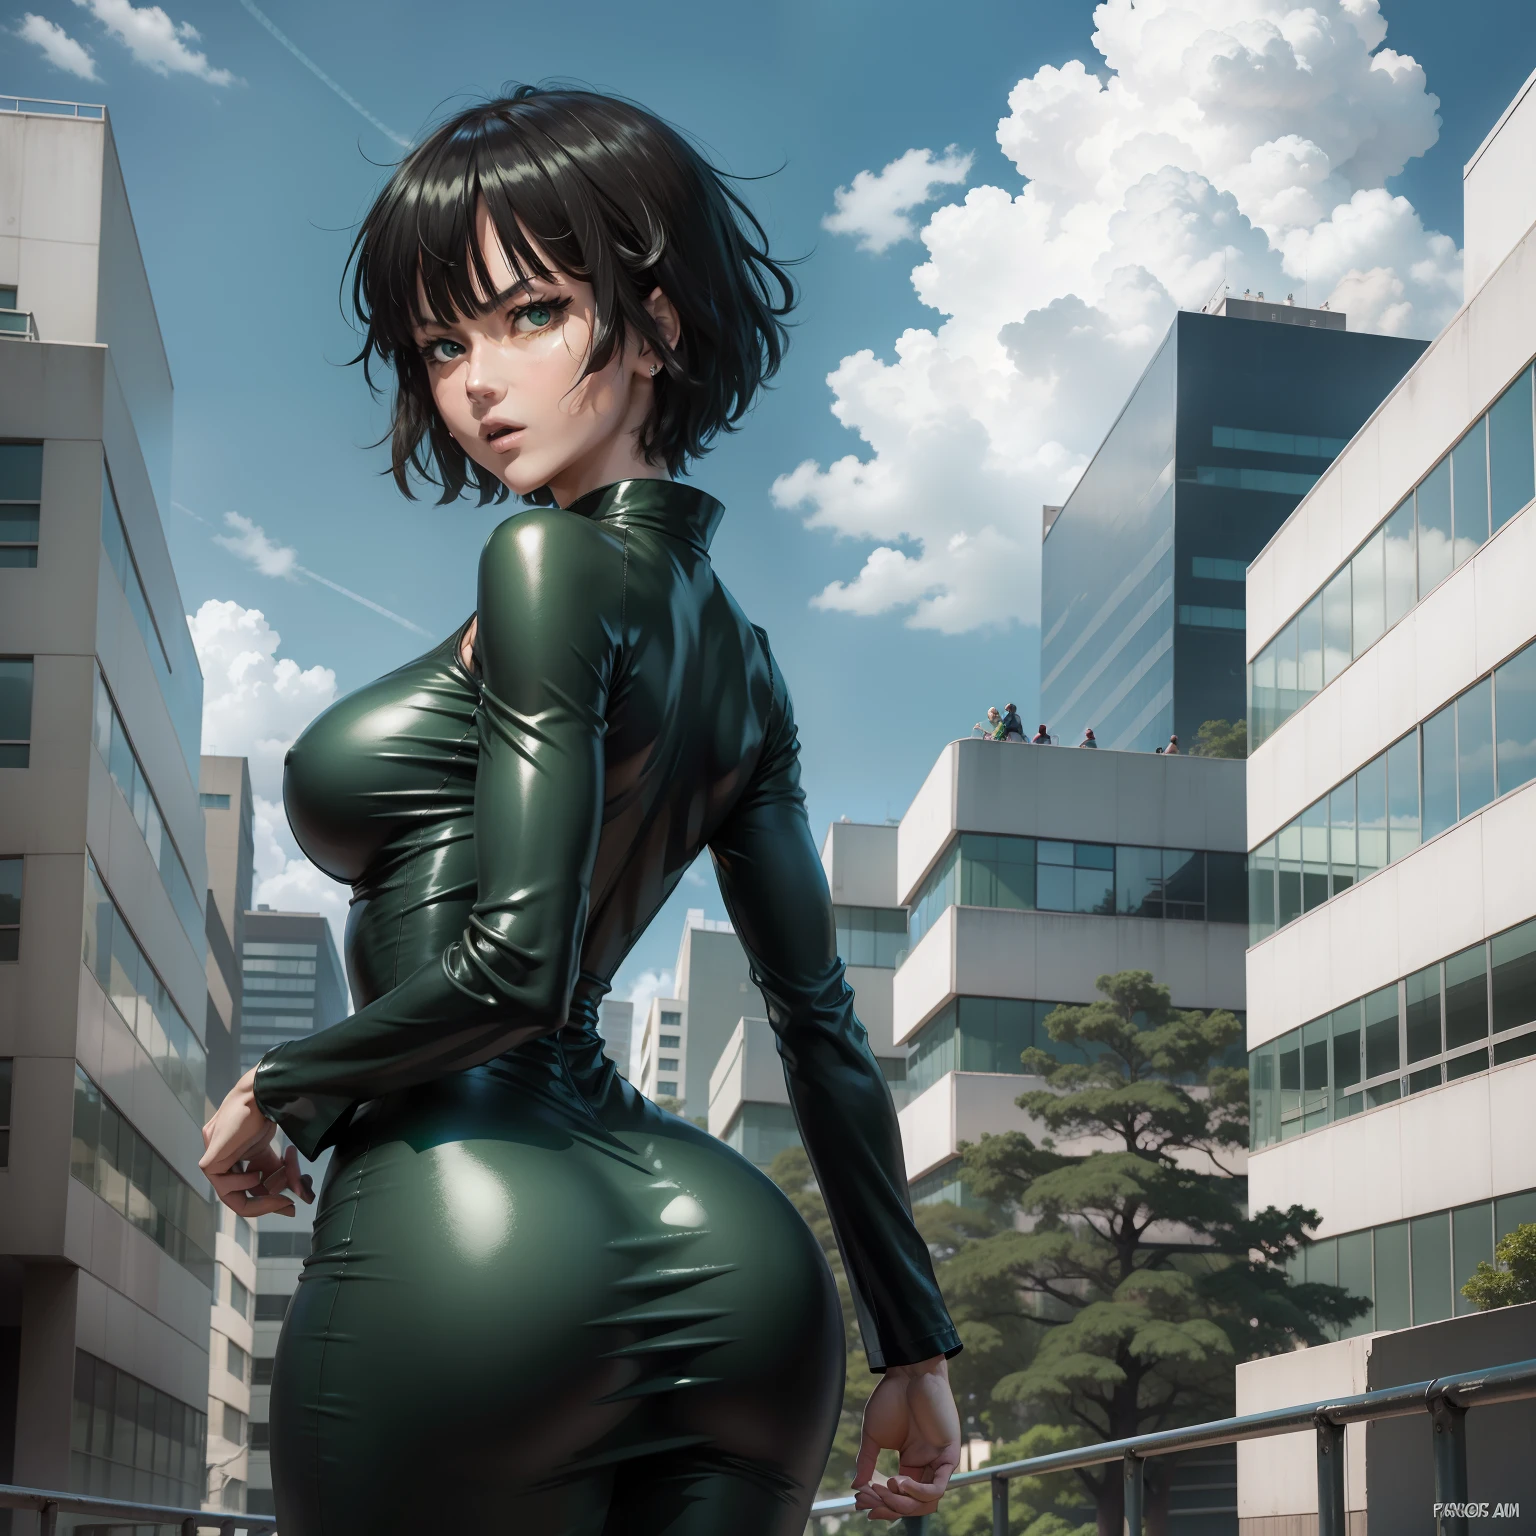 Fukibi in one punch man. Sexy. Green. Storm. Flying. Blue sky. Building, butt facing camera, back view, tight dress